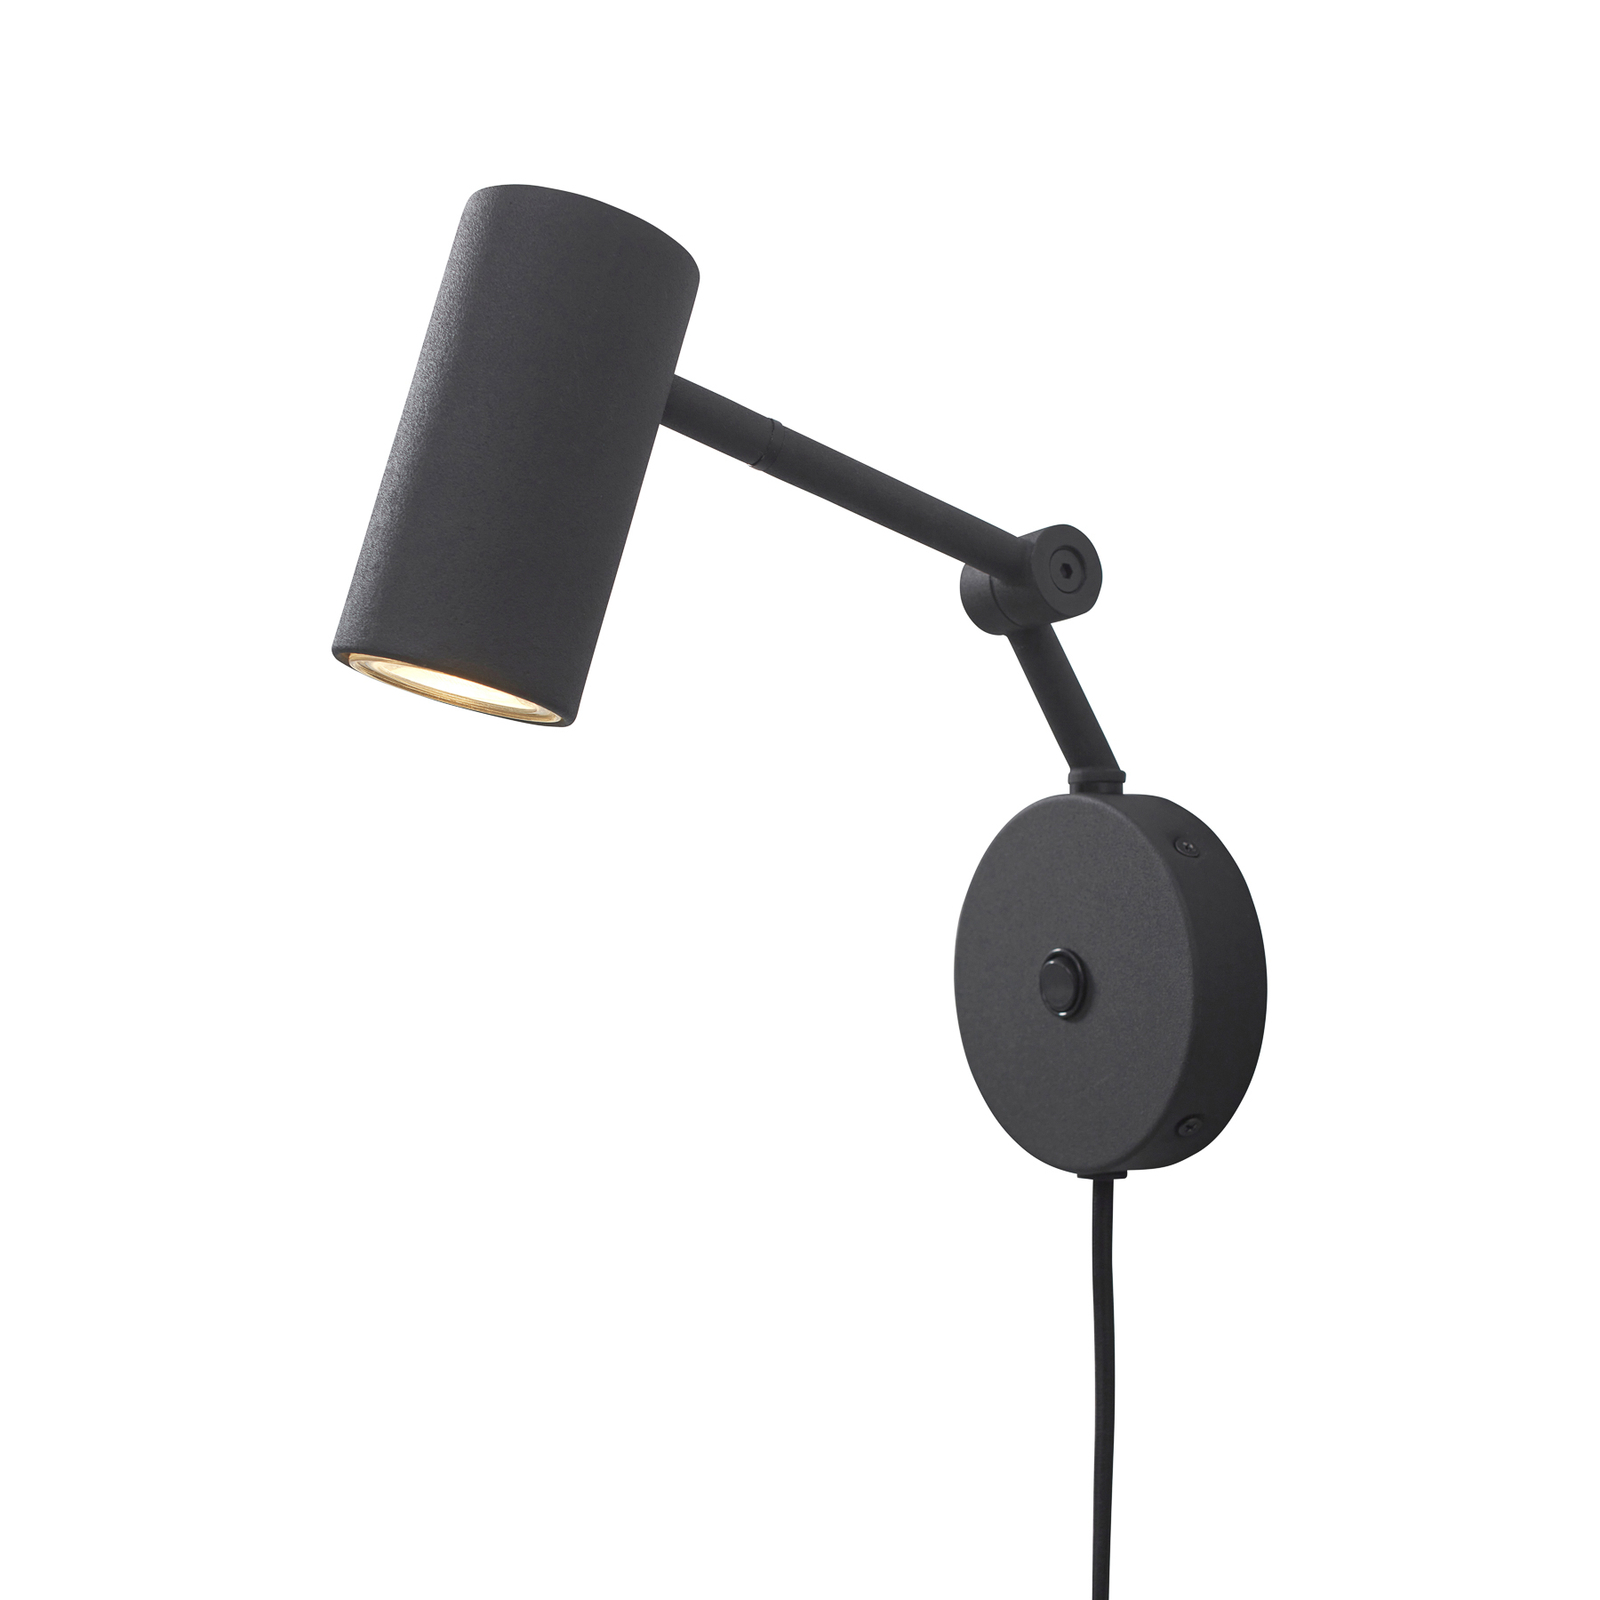 It's about RoMi wall light Montreux, black